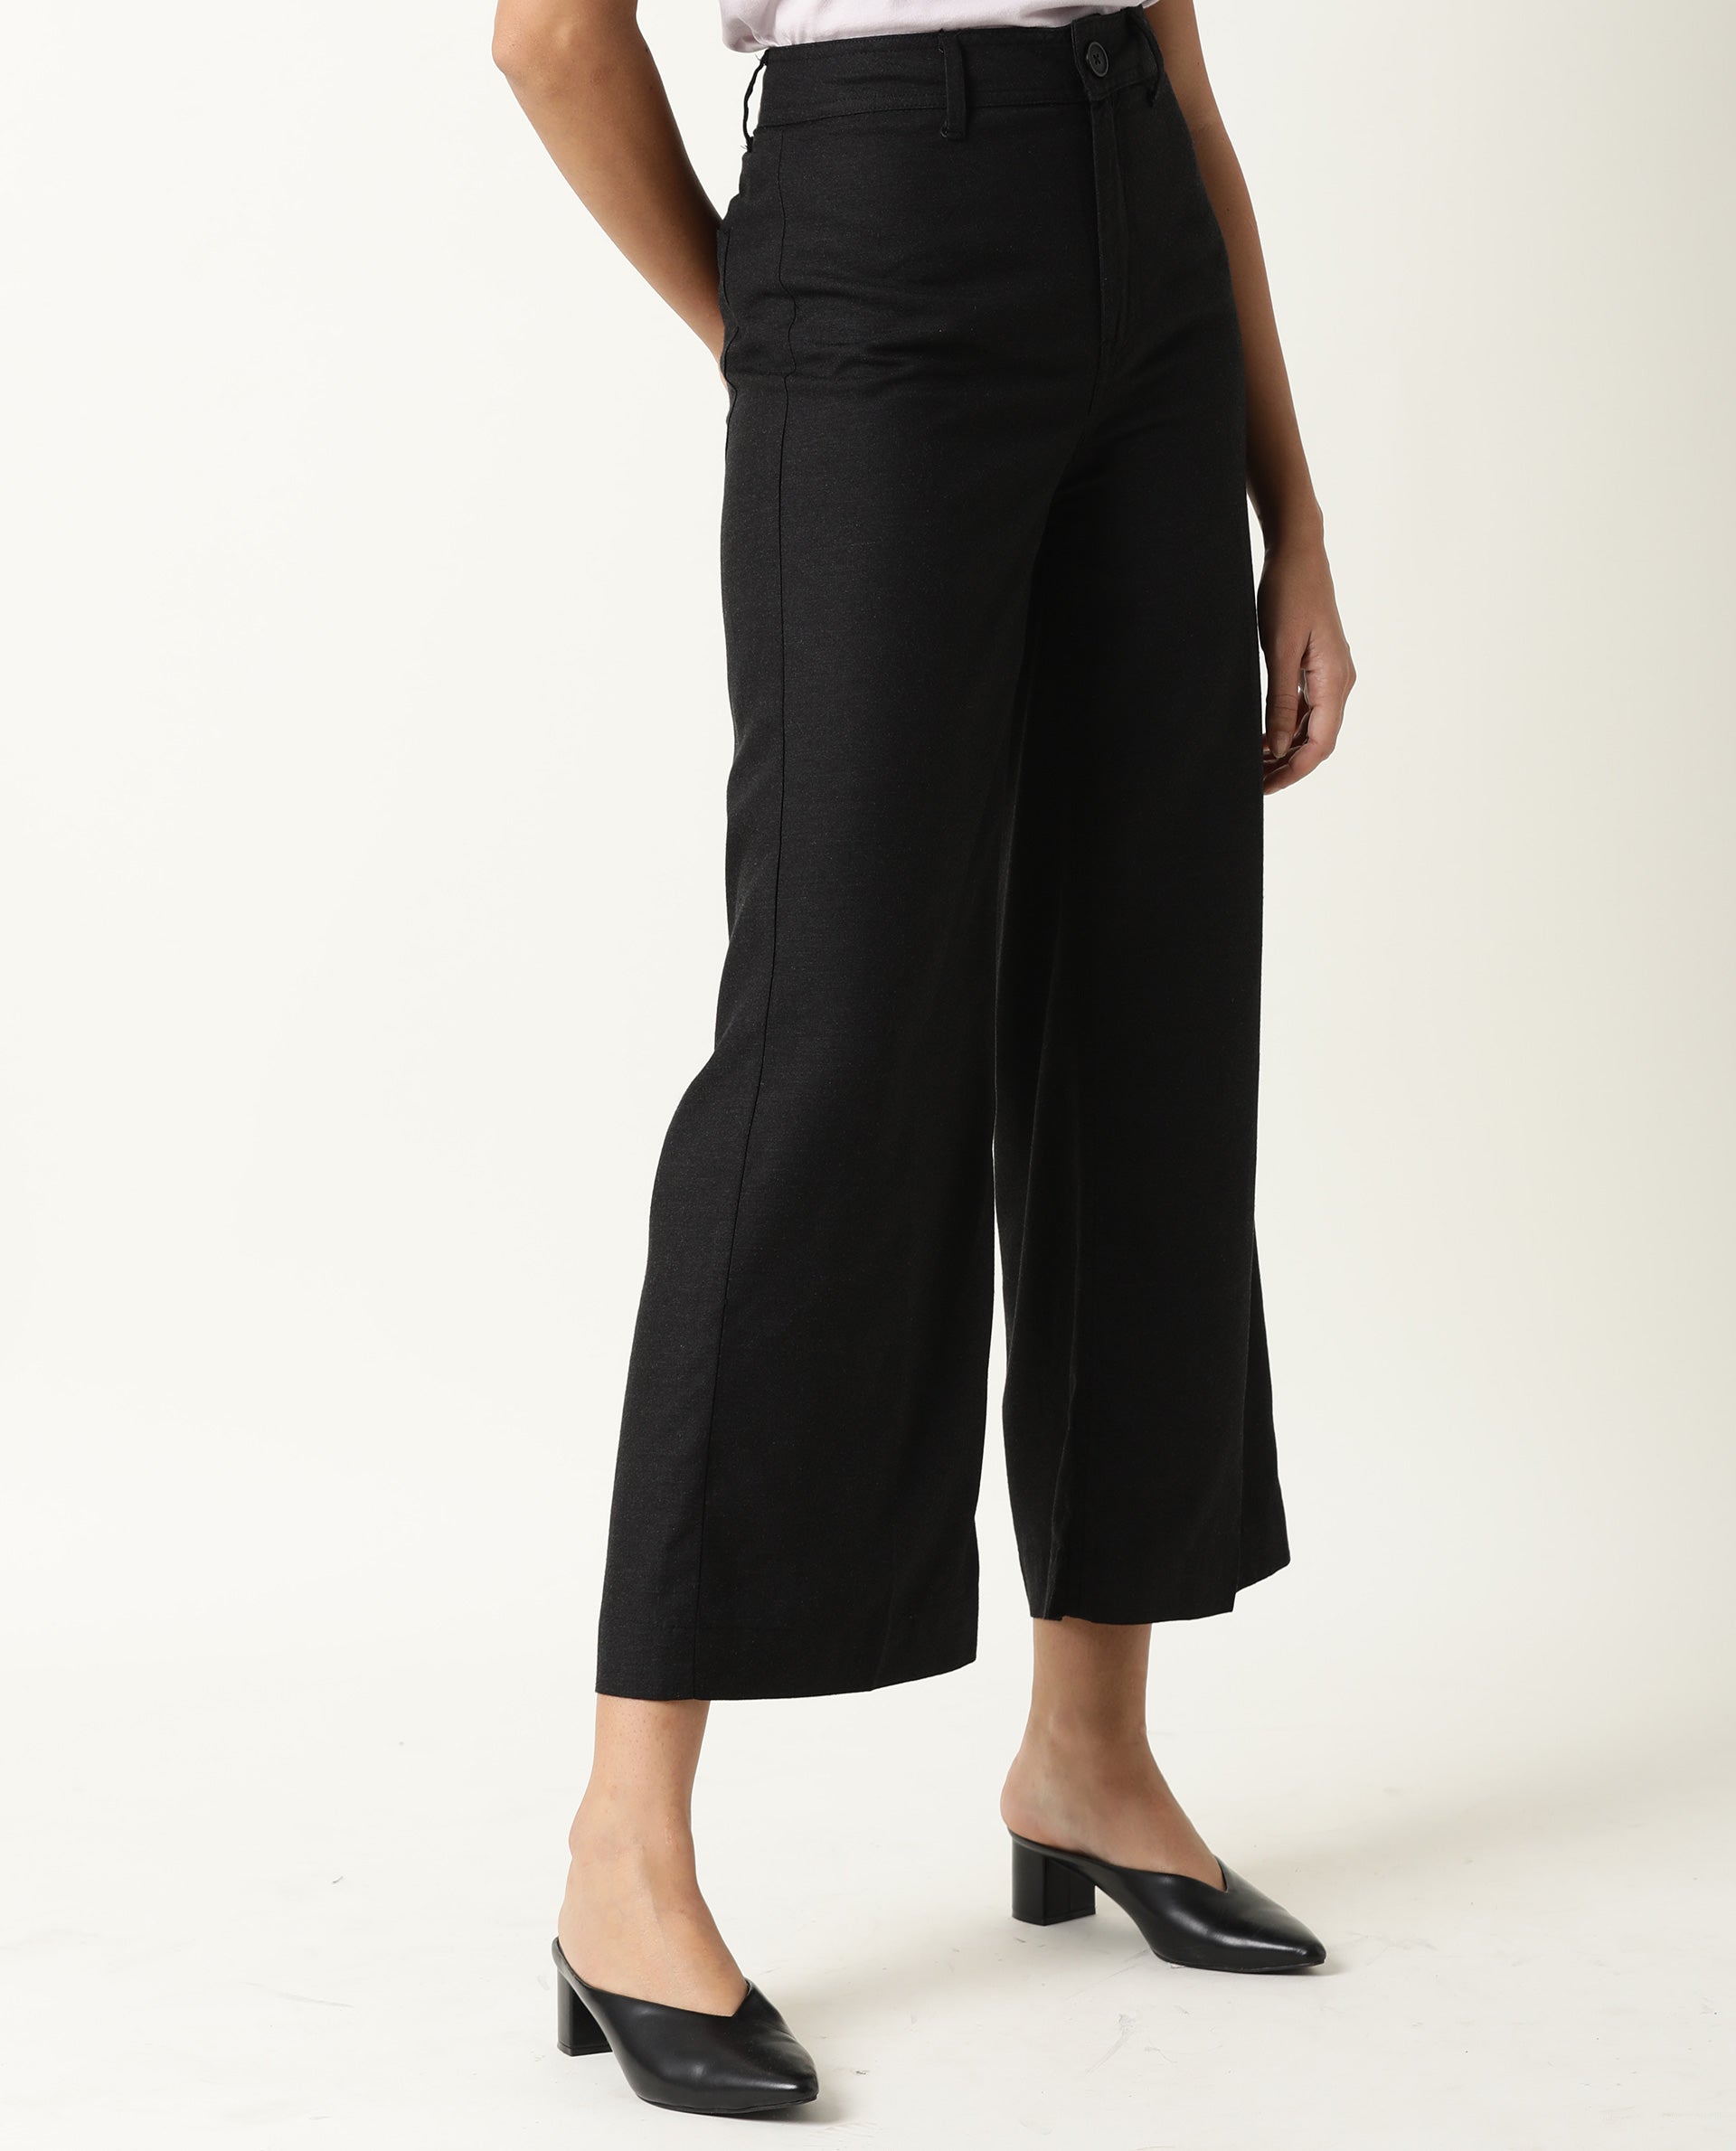 WOMEN'S MICKY BLACK TROUSERS COTTON LYOCELL FABRIC FULL SLEEVES BUTTON CLOSURE SOLID